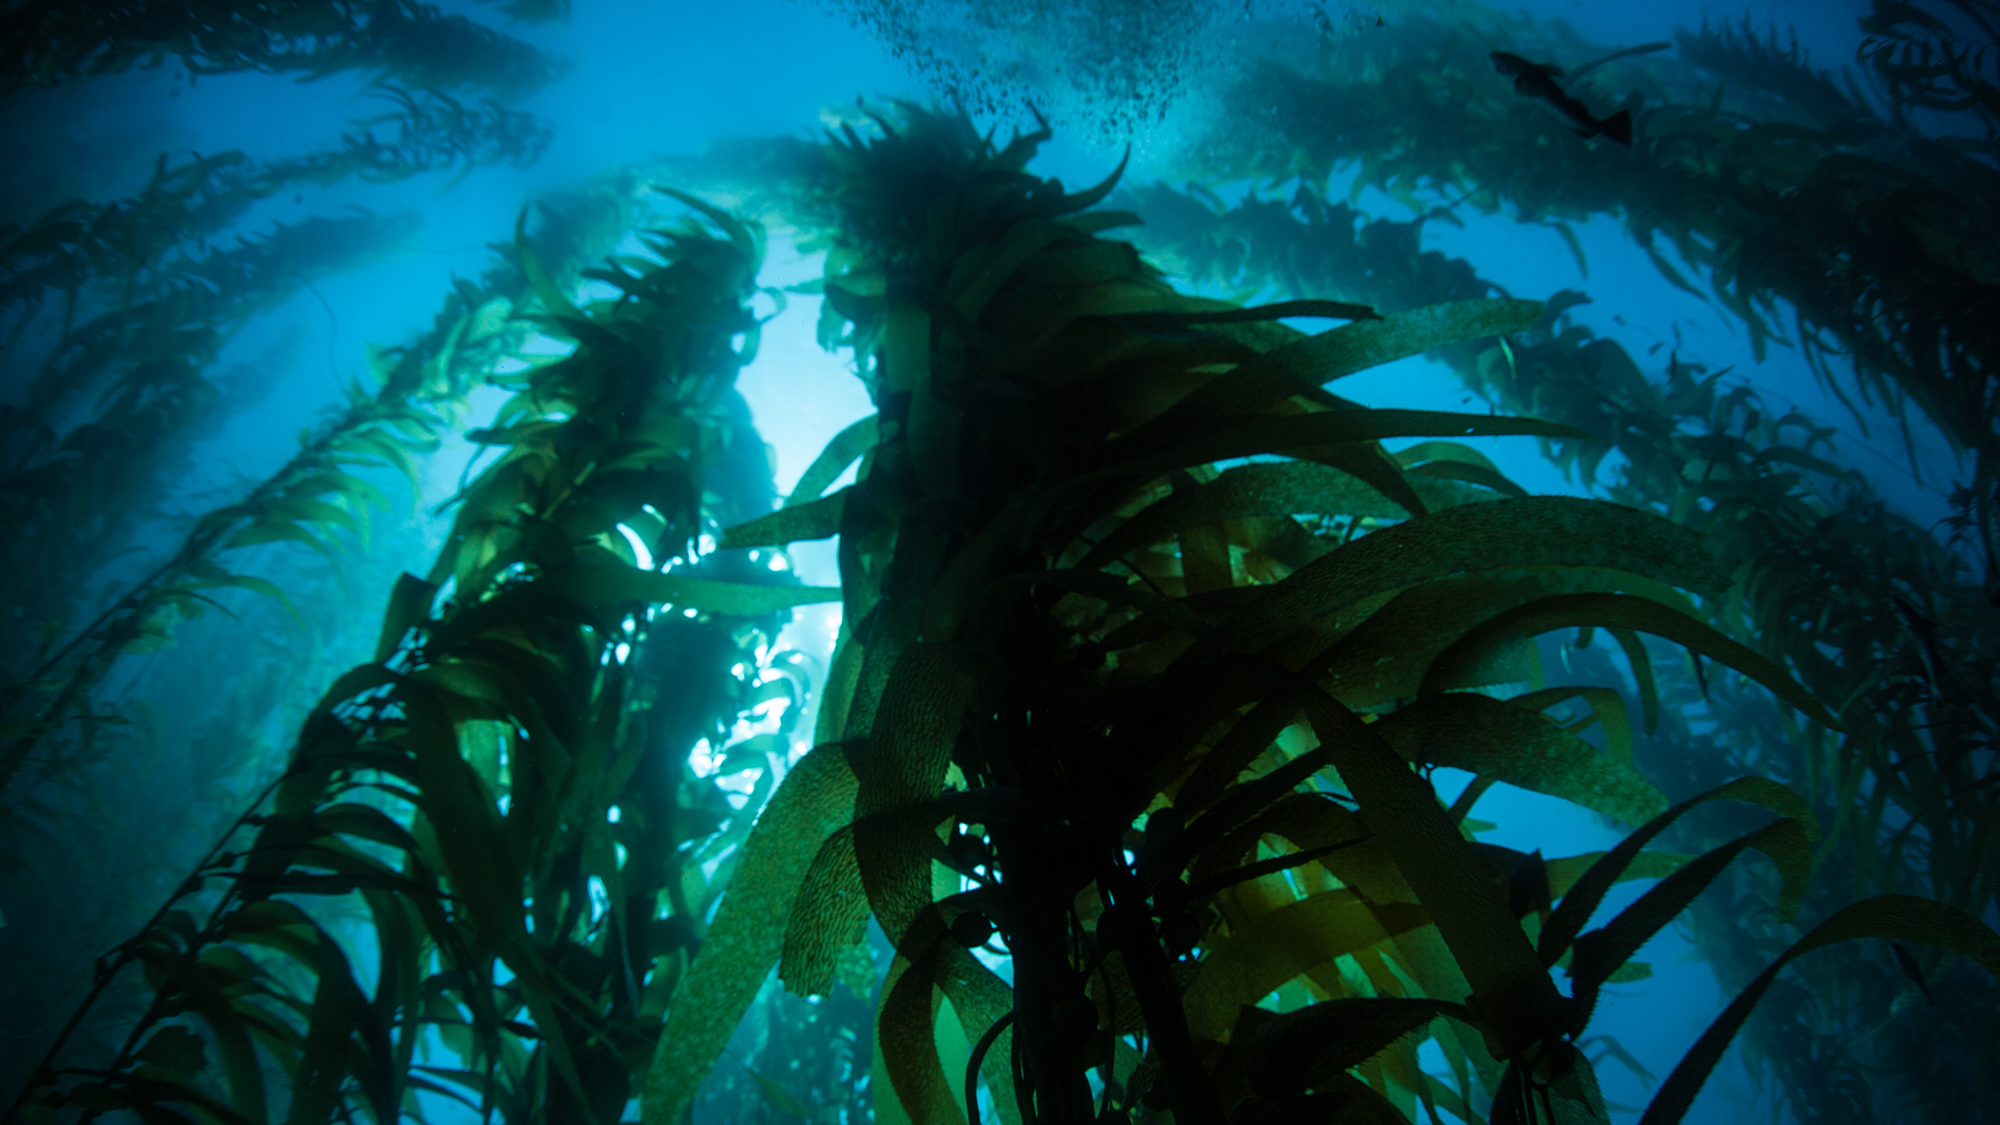 Kelp holds a timeline of Earth’s history